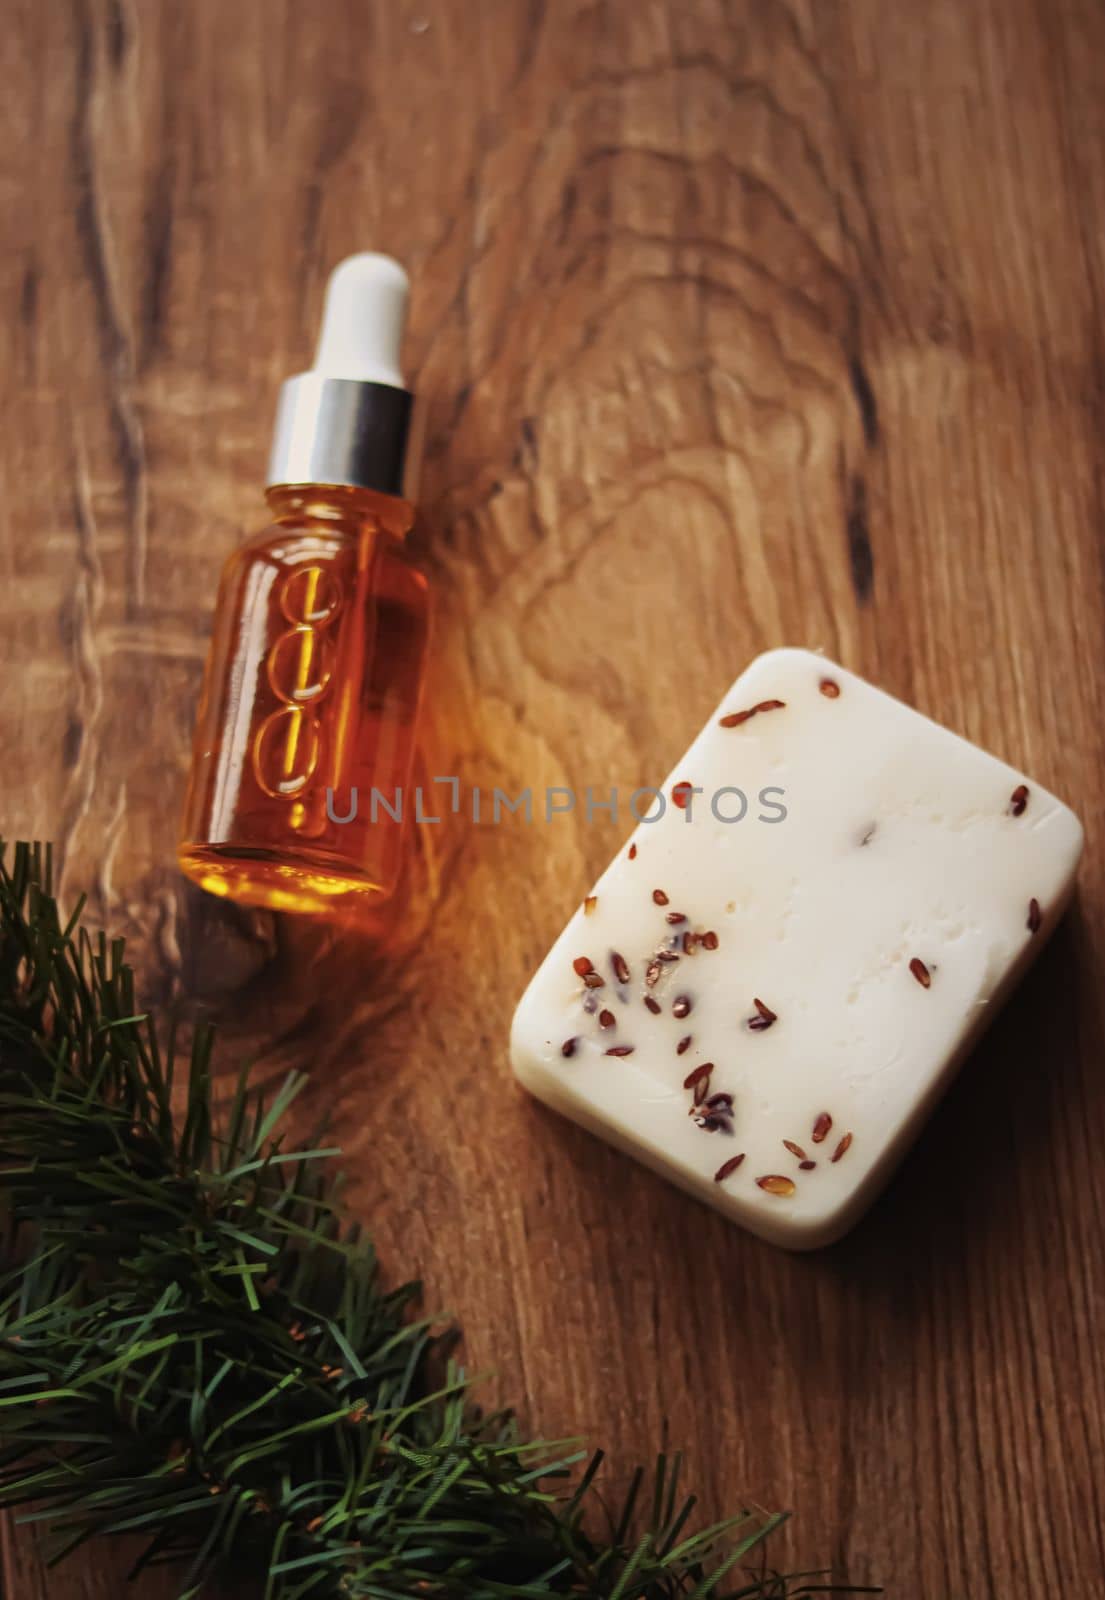 Oil serum bottle and natural herbal handmade soap, beauty and skincare product by Anneleven